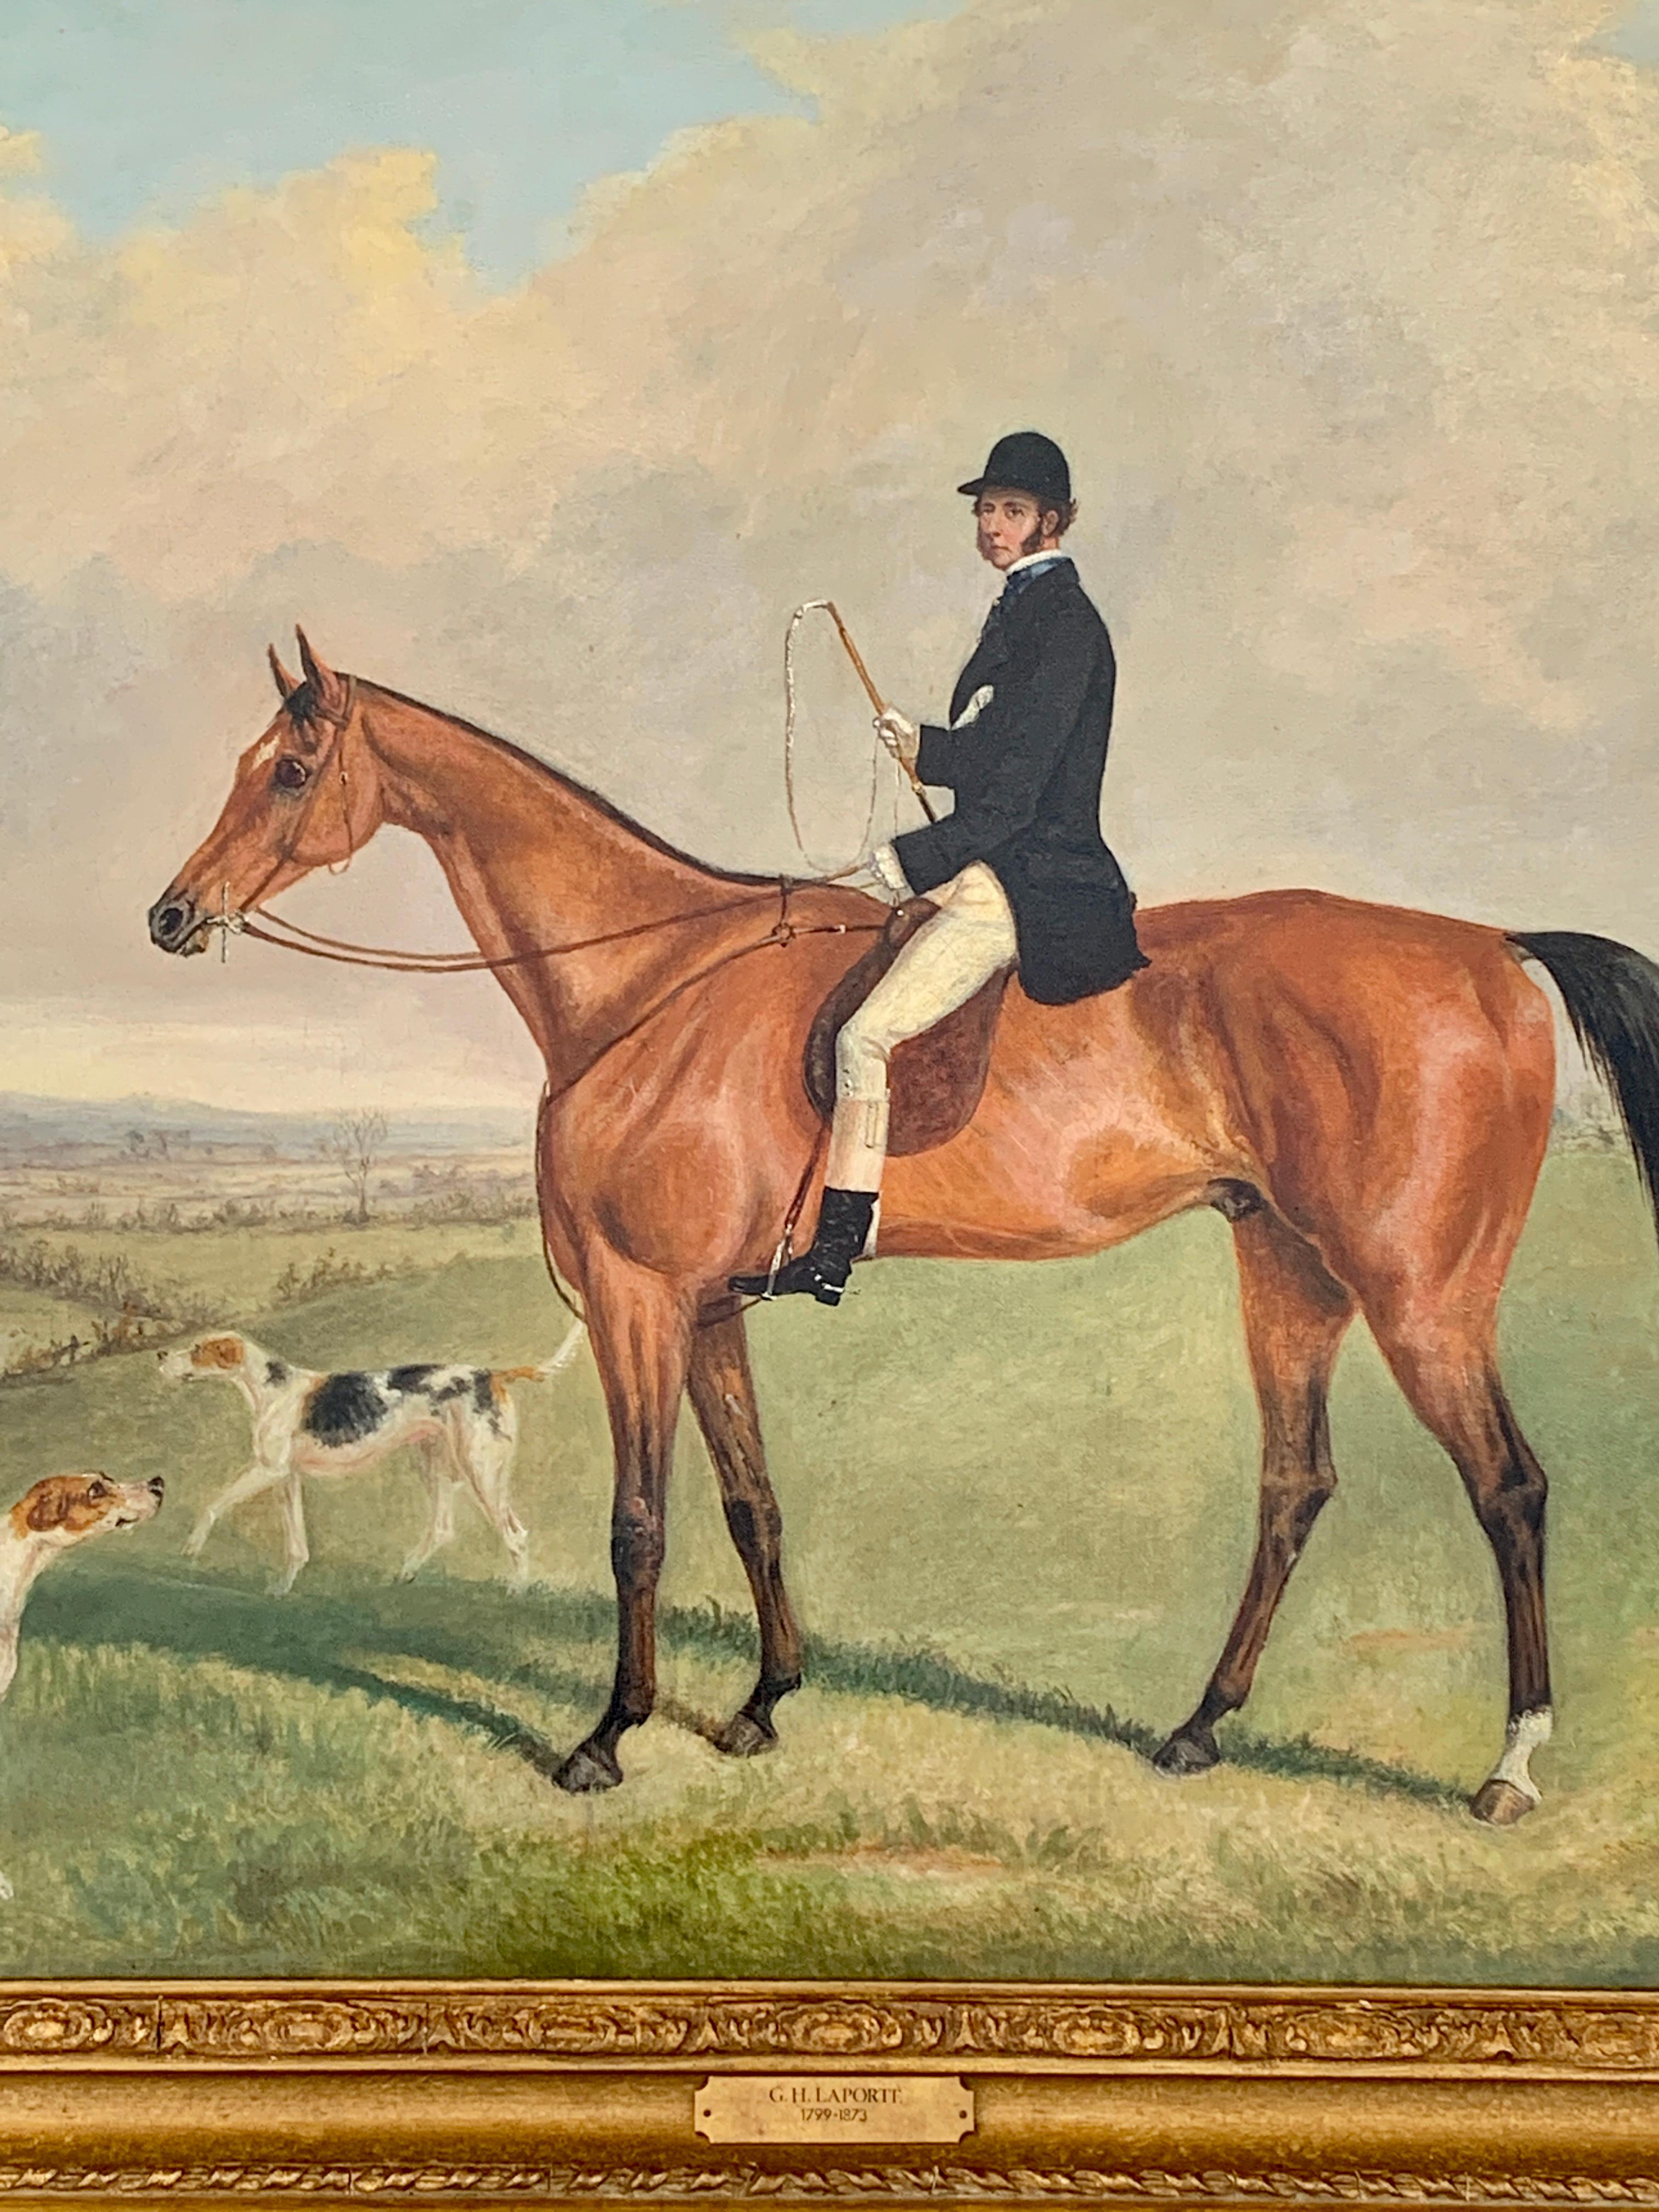 Fox Huntsman seated on a Bay horse, with hounds in an English landscape. - Painting by George Henry Laporte